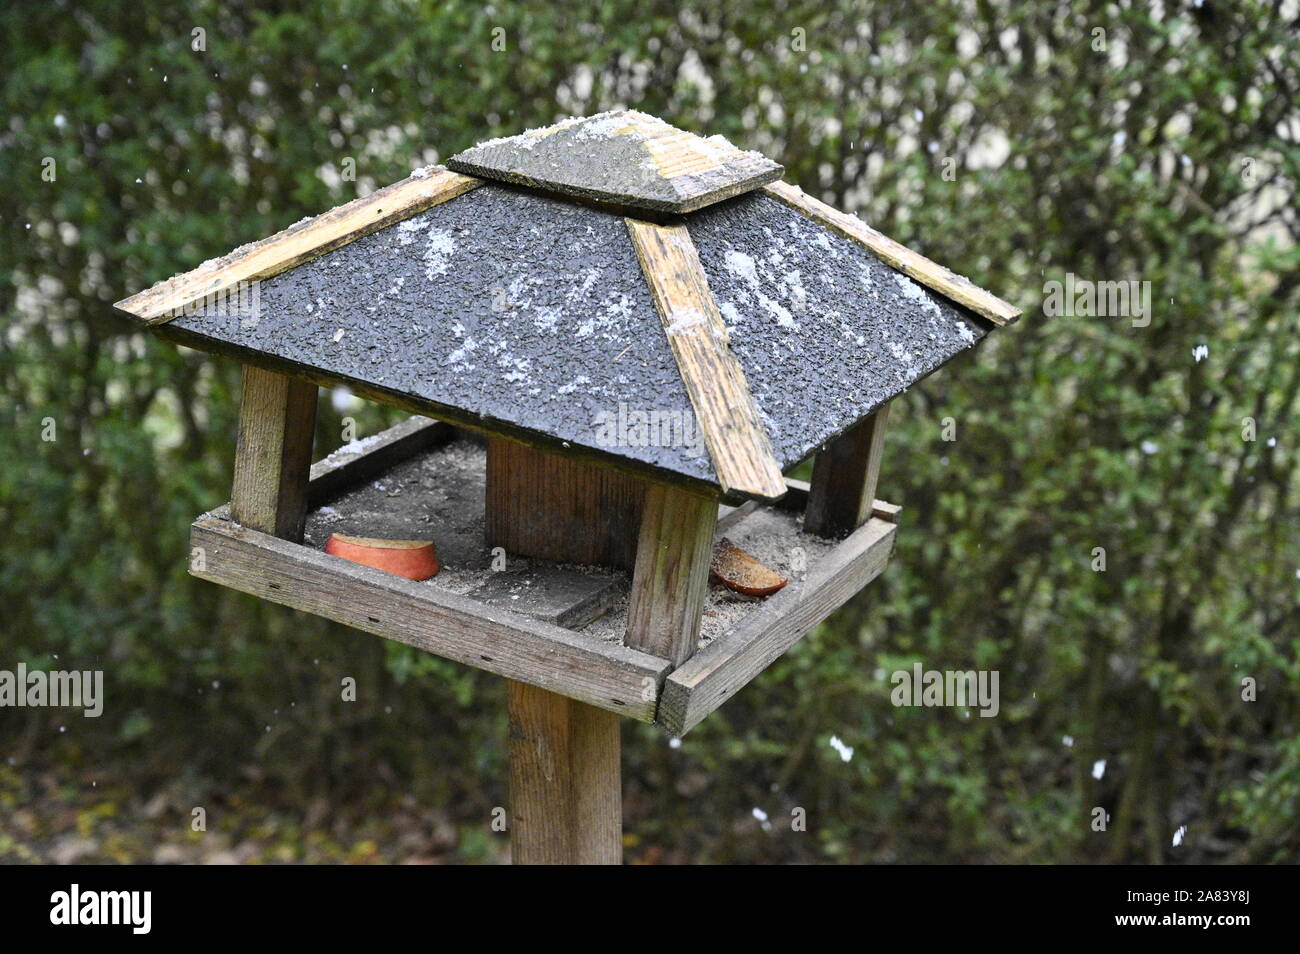 Viborg, Denmark, 6th Nov 2019: The very first snowflakes this winter are falling. With temperatures just around the freezing point, the snowflakes are big, heavy and wet. Right now is a good time to start feeding the birds. Credit: Brian Bjeldbak/Alamy Live News Stock Photo